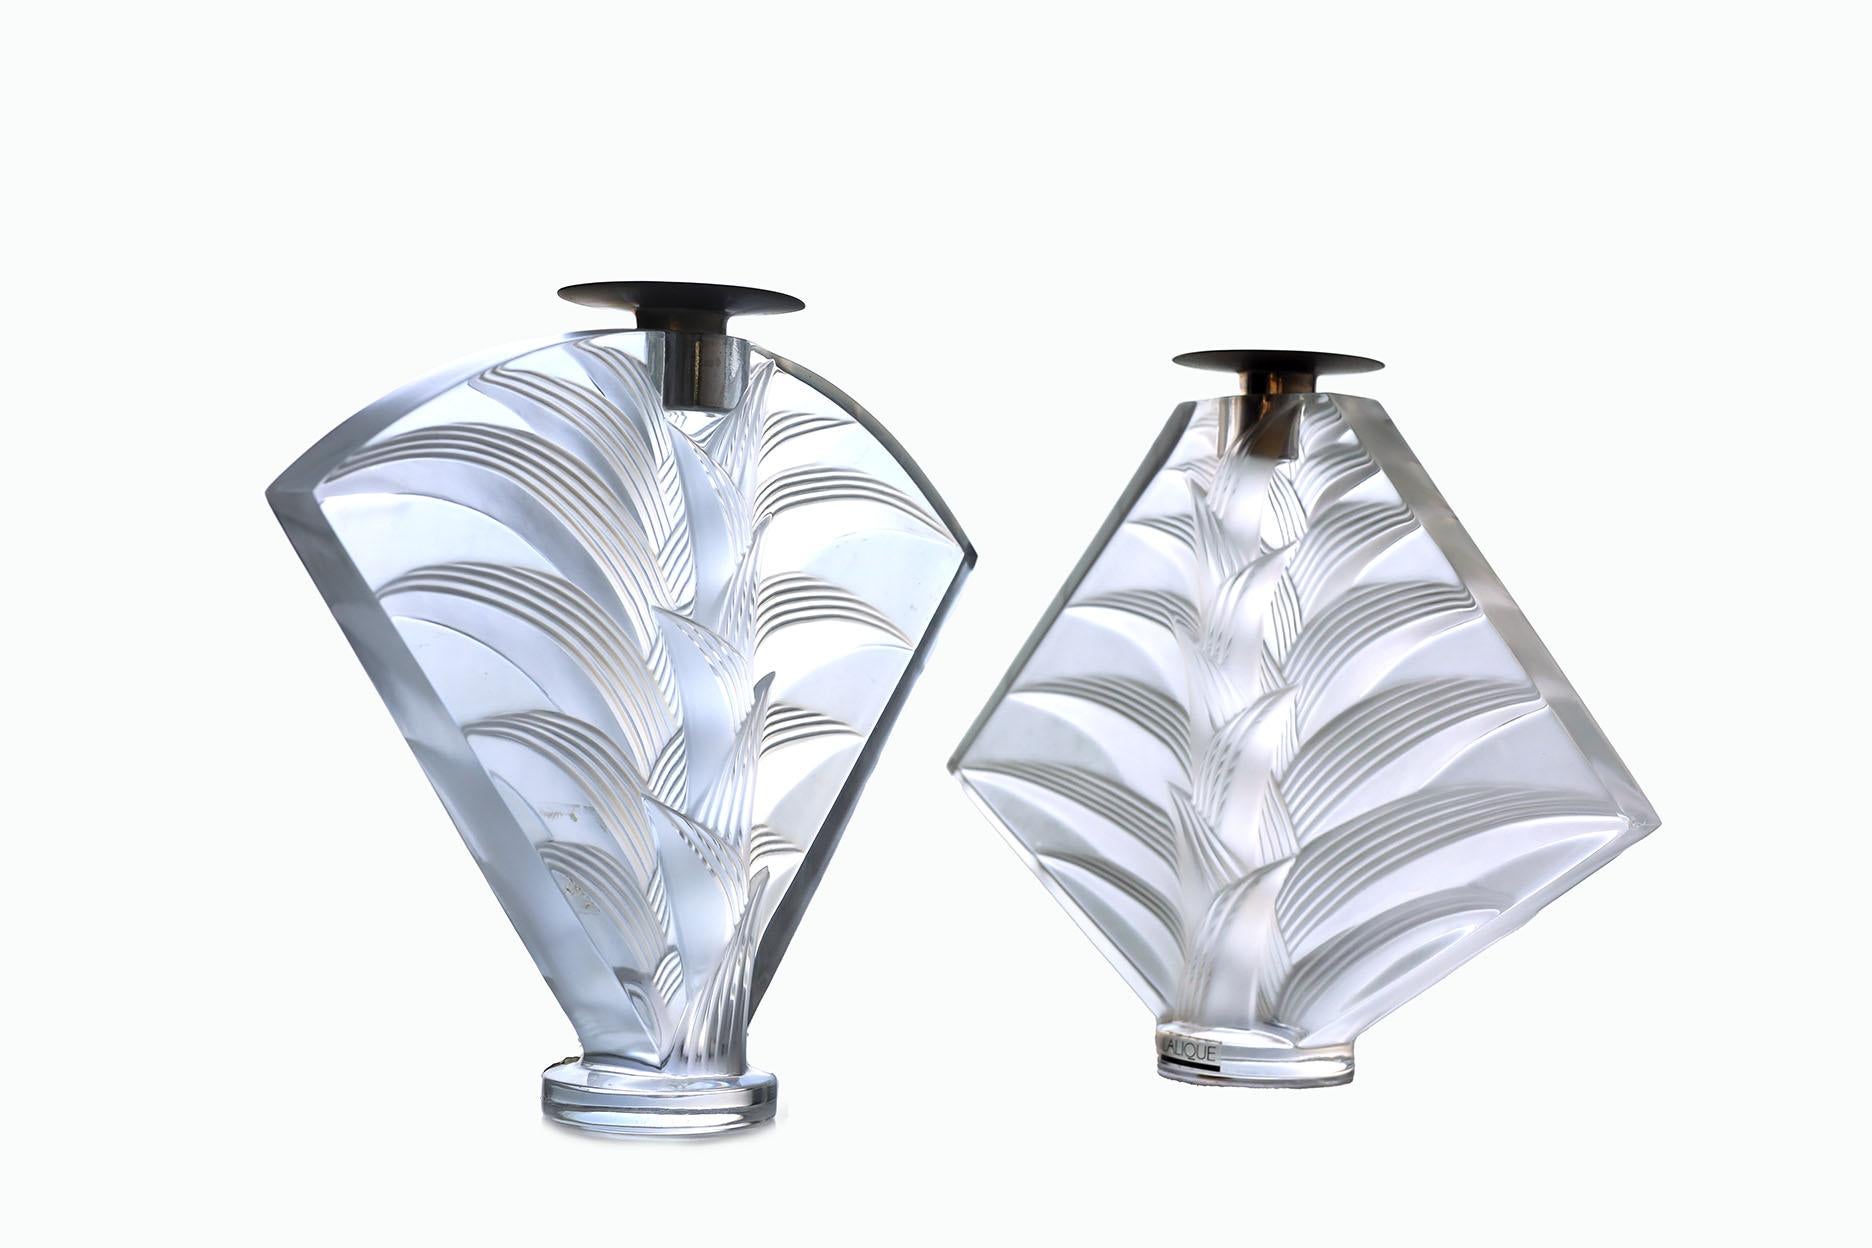 Pair of crystal Ravelina candle holder made by Lalique.
Simply stunning.
Signed and with original Lalique stamp.